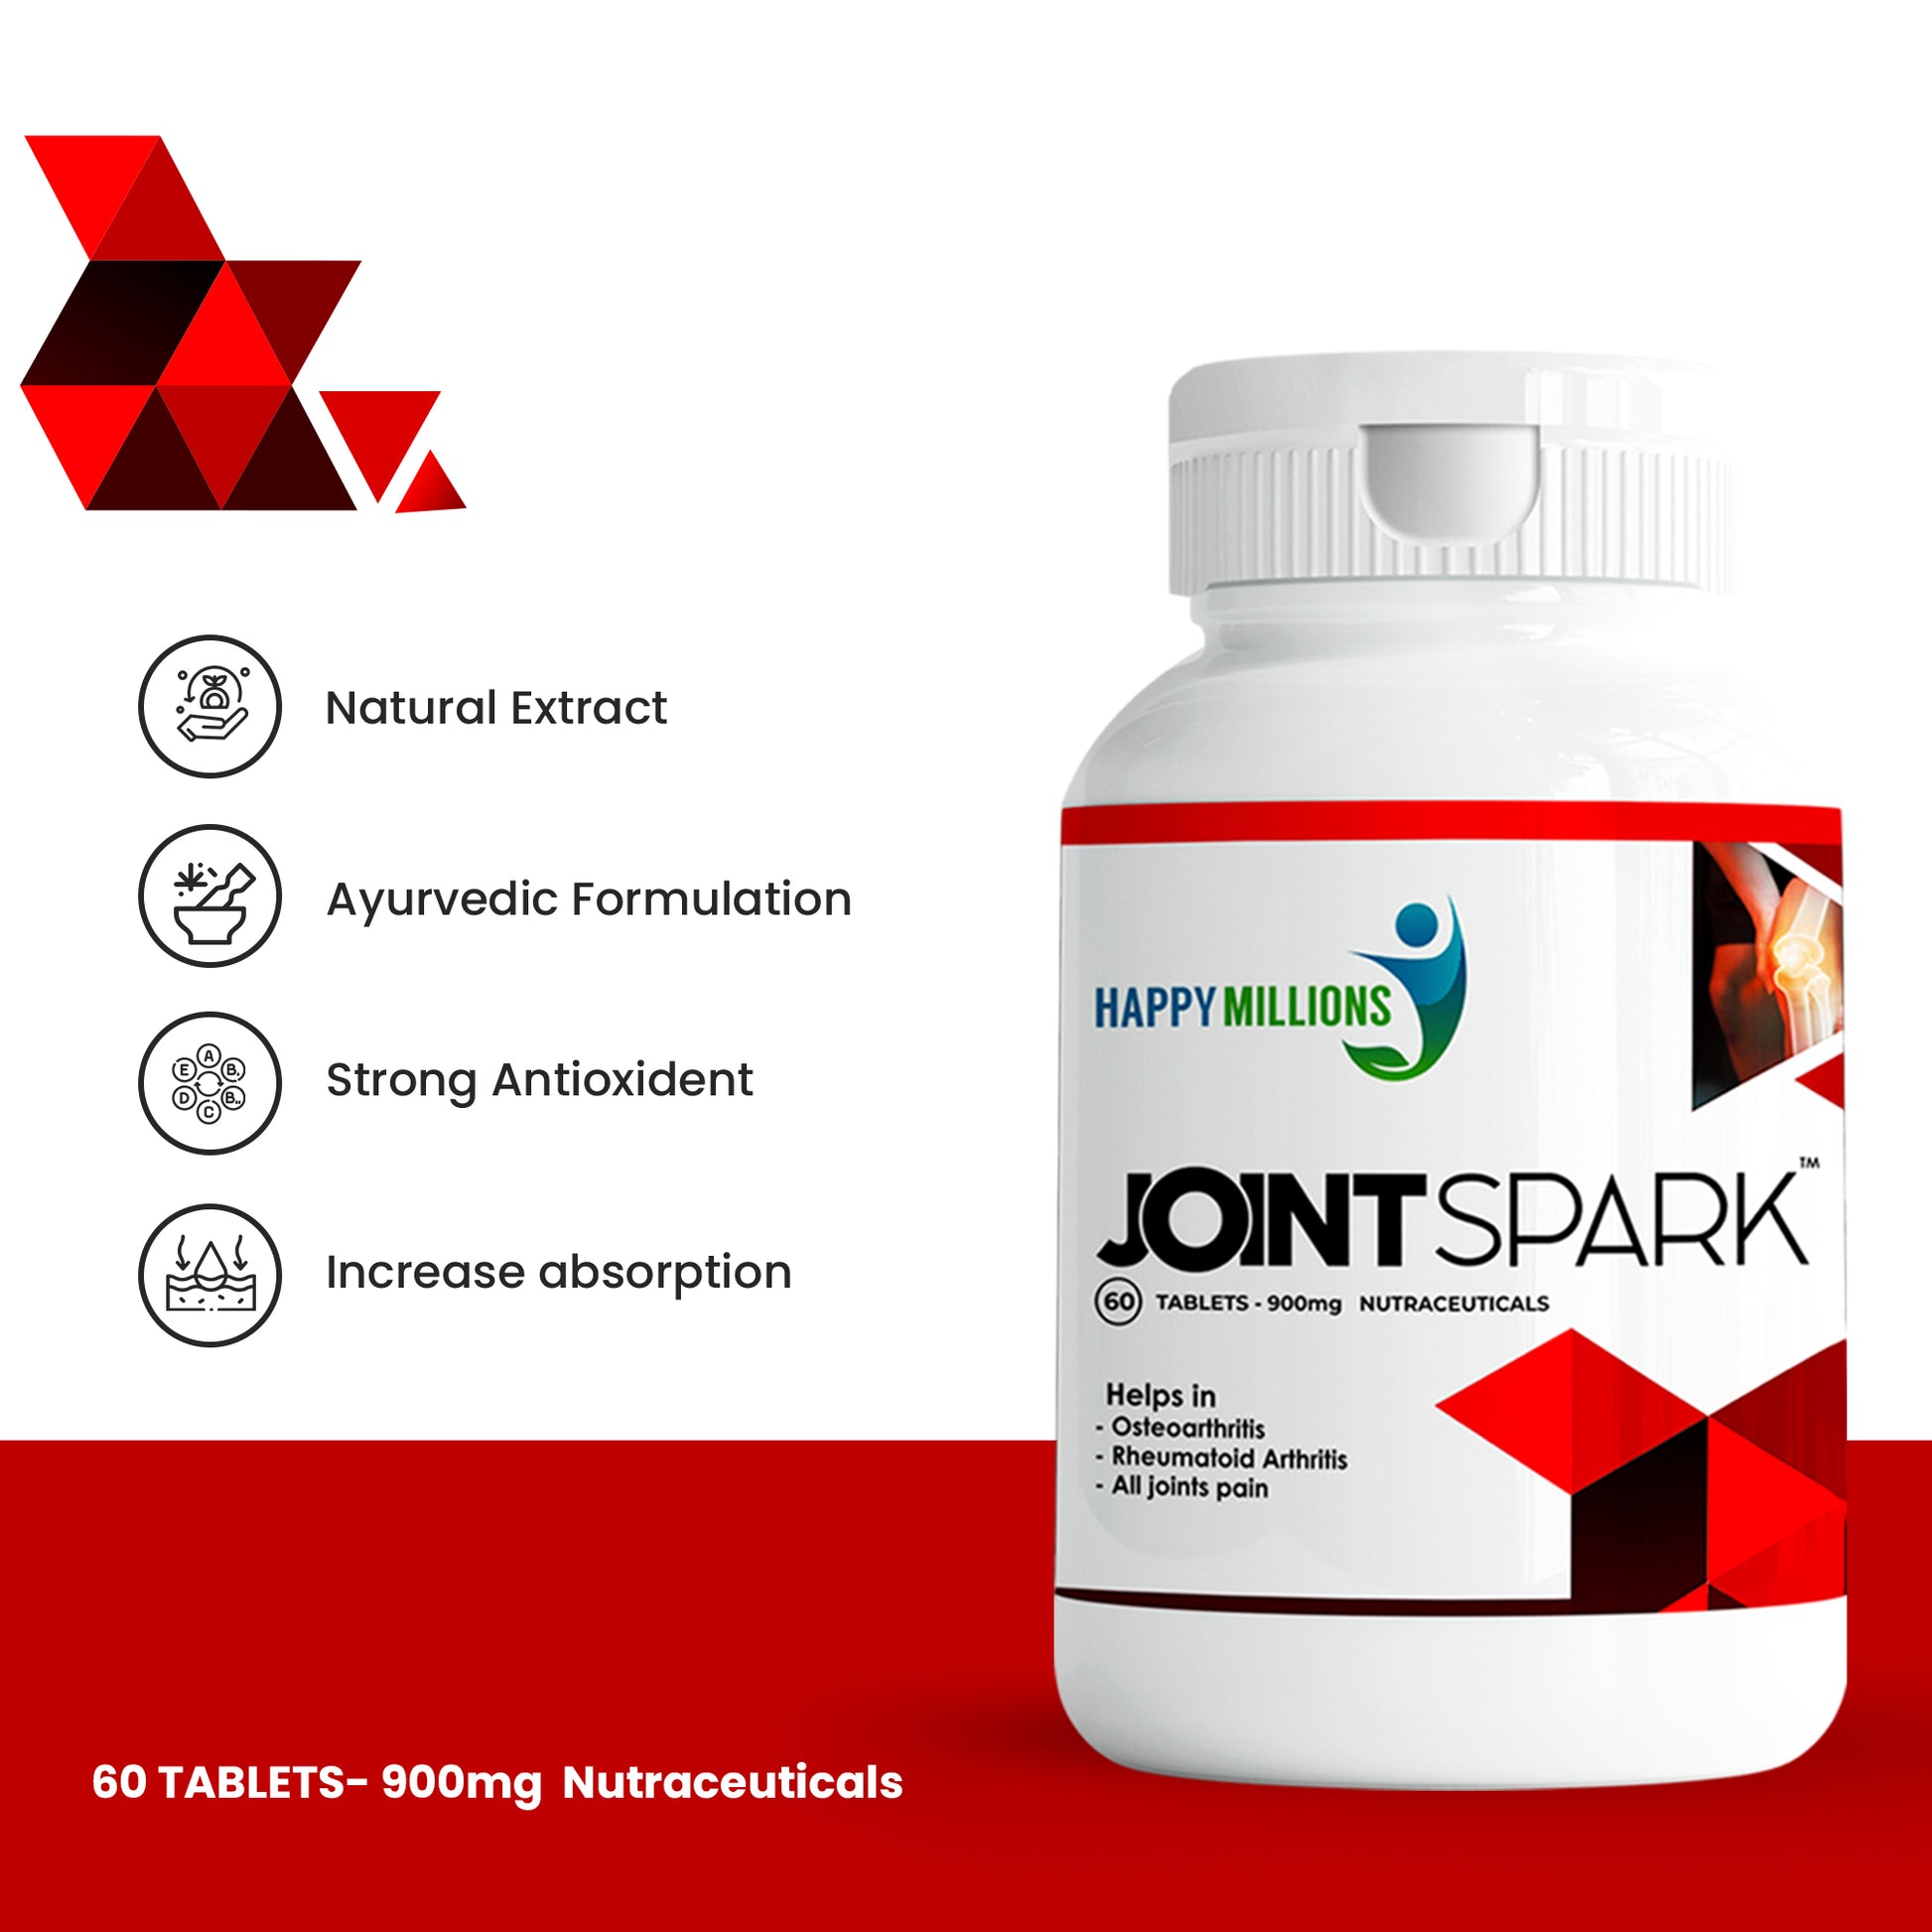 Explore Happy Millions Jointspark Benefits Natural Ayurvedic Relief for Joint Pain & Improved Flexibility.